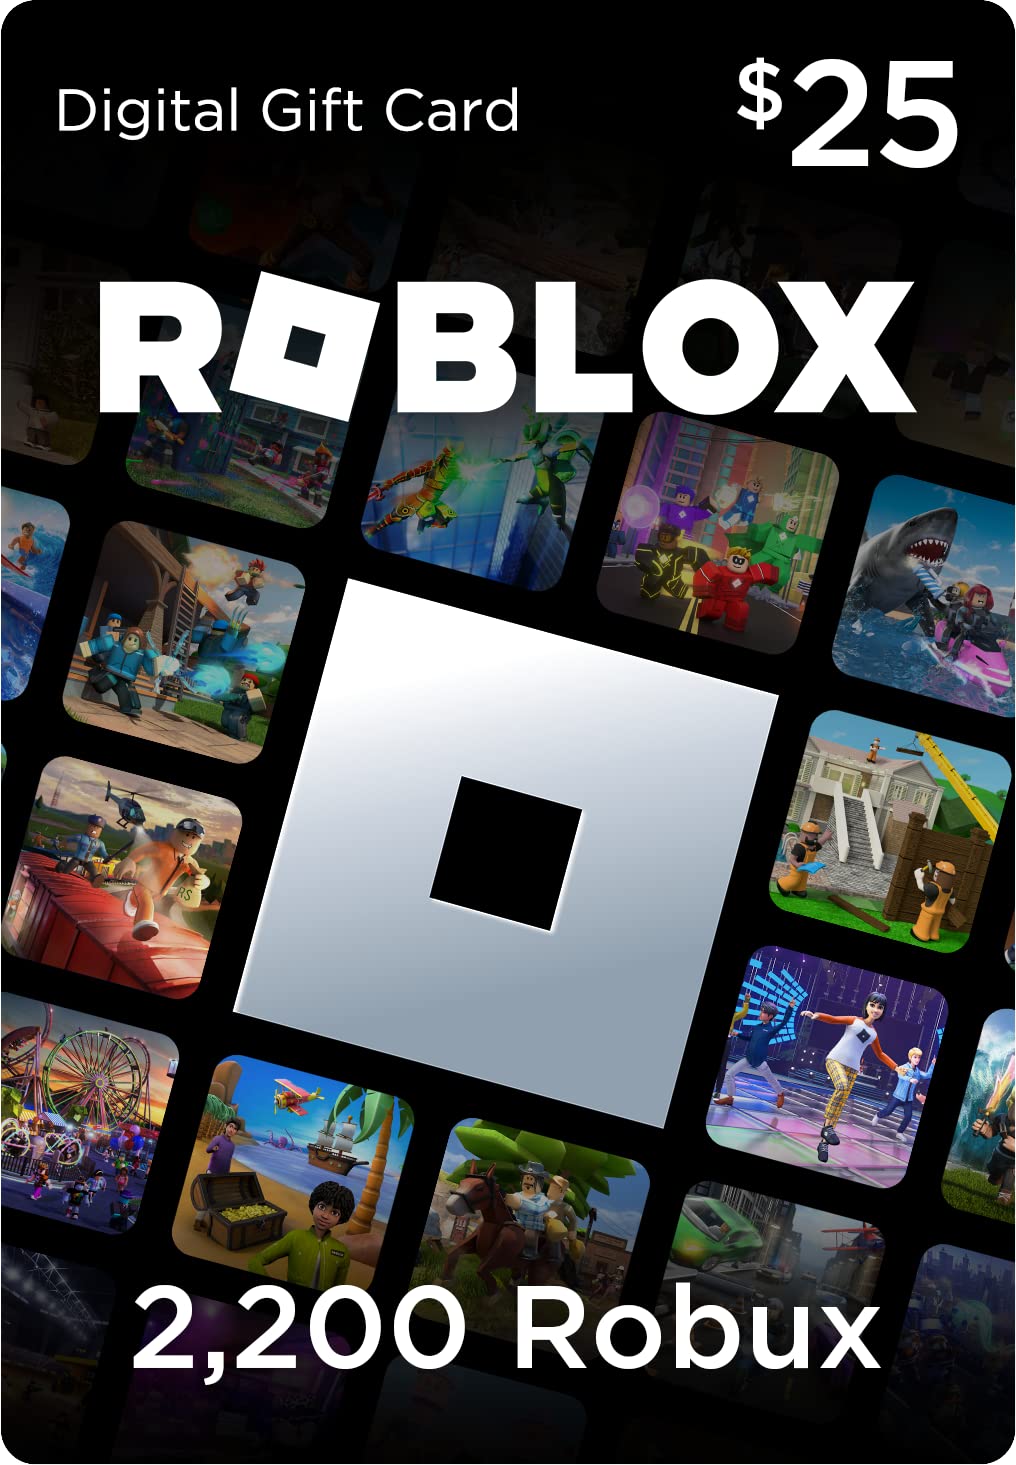 $10.00 Roblox Gift Card Digital Pin Delivery 1000 Robux Premium Membership  - Other Gift Cards - Gameflip